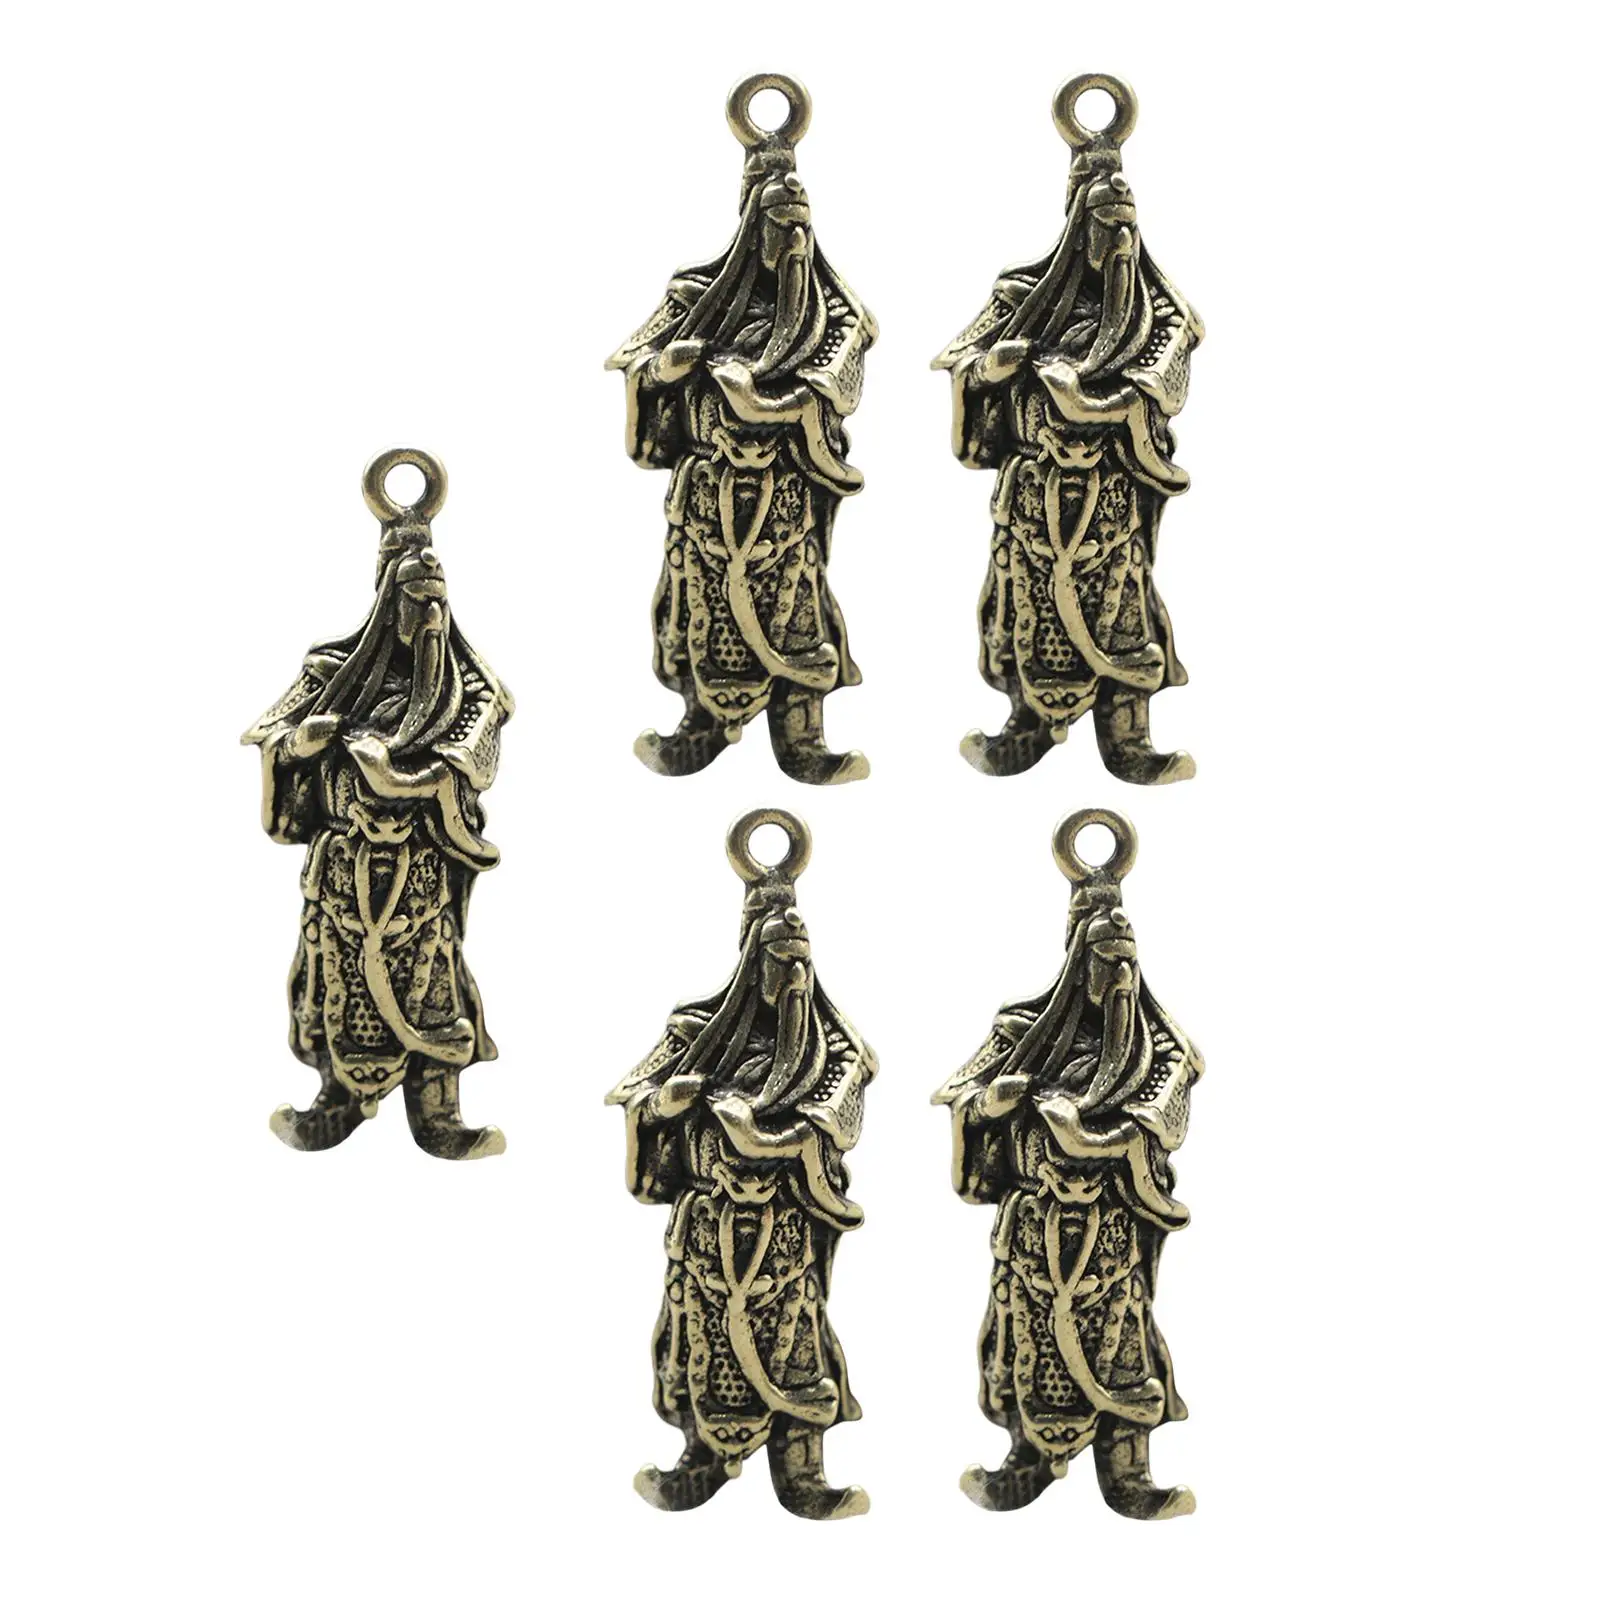 5 Pieces Copper Small Statues Figurine Novelty Gift Pendant Collectible for Decor Keychains Home Decoration Bracelet Necklace